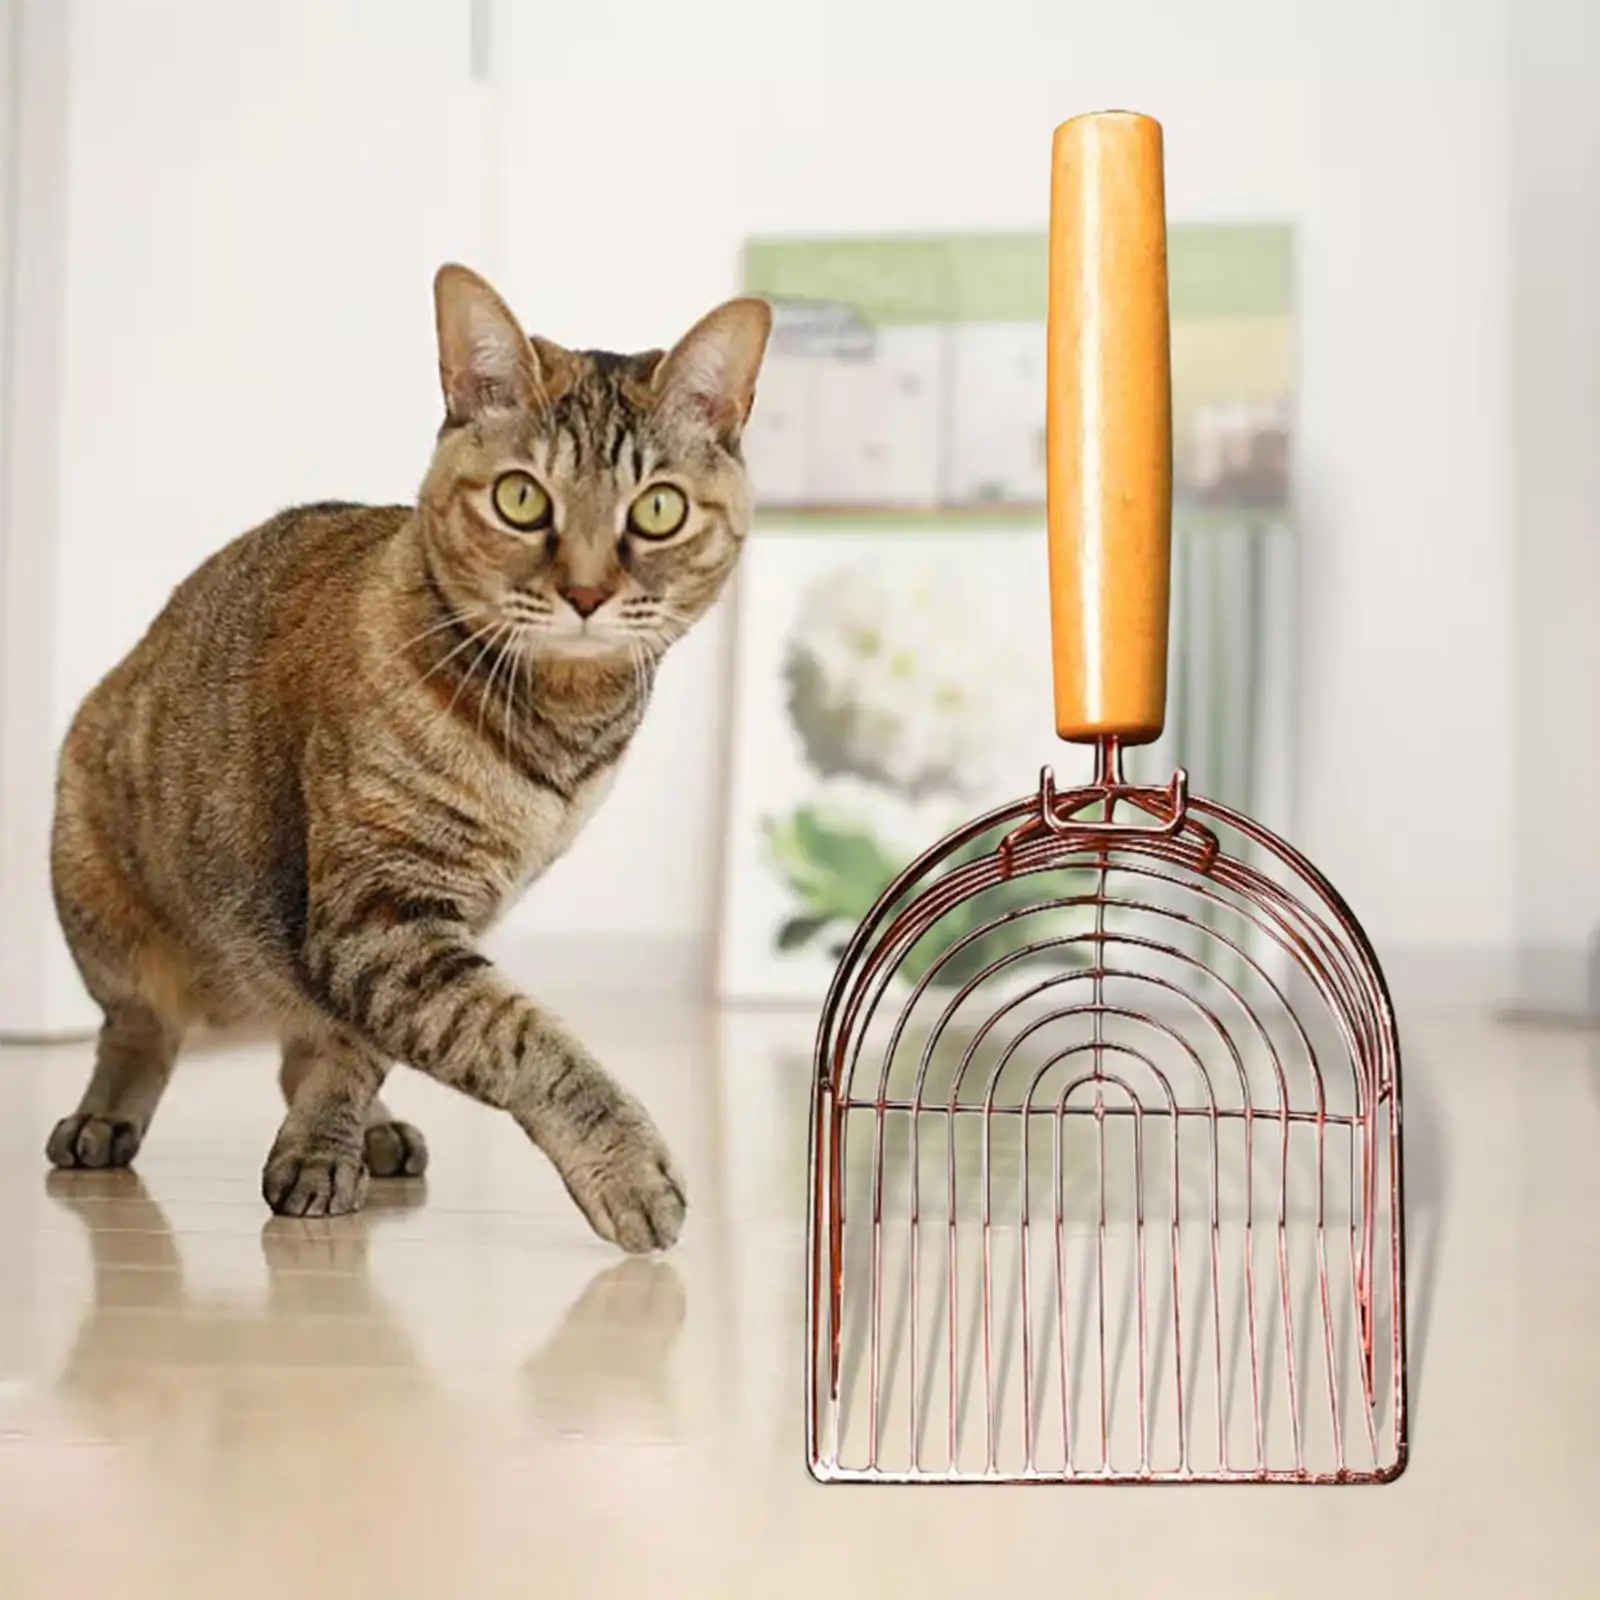 Portable Cat Litter Scooper Pet Litter Sifter Scooper with Handle Cat Sand Toilet Cleaning Tool Pets Supplies